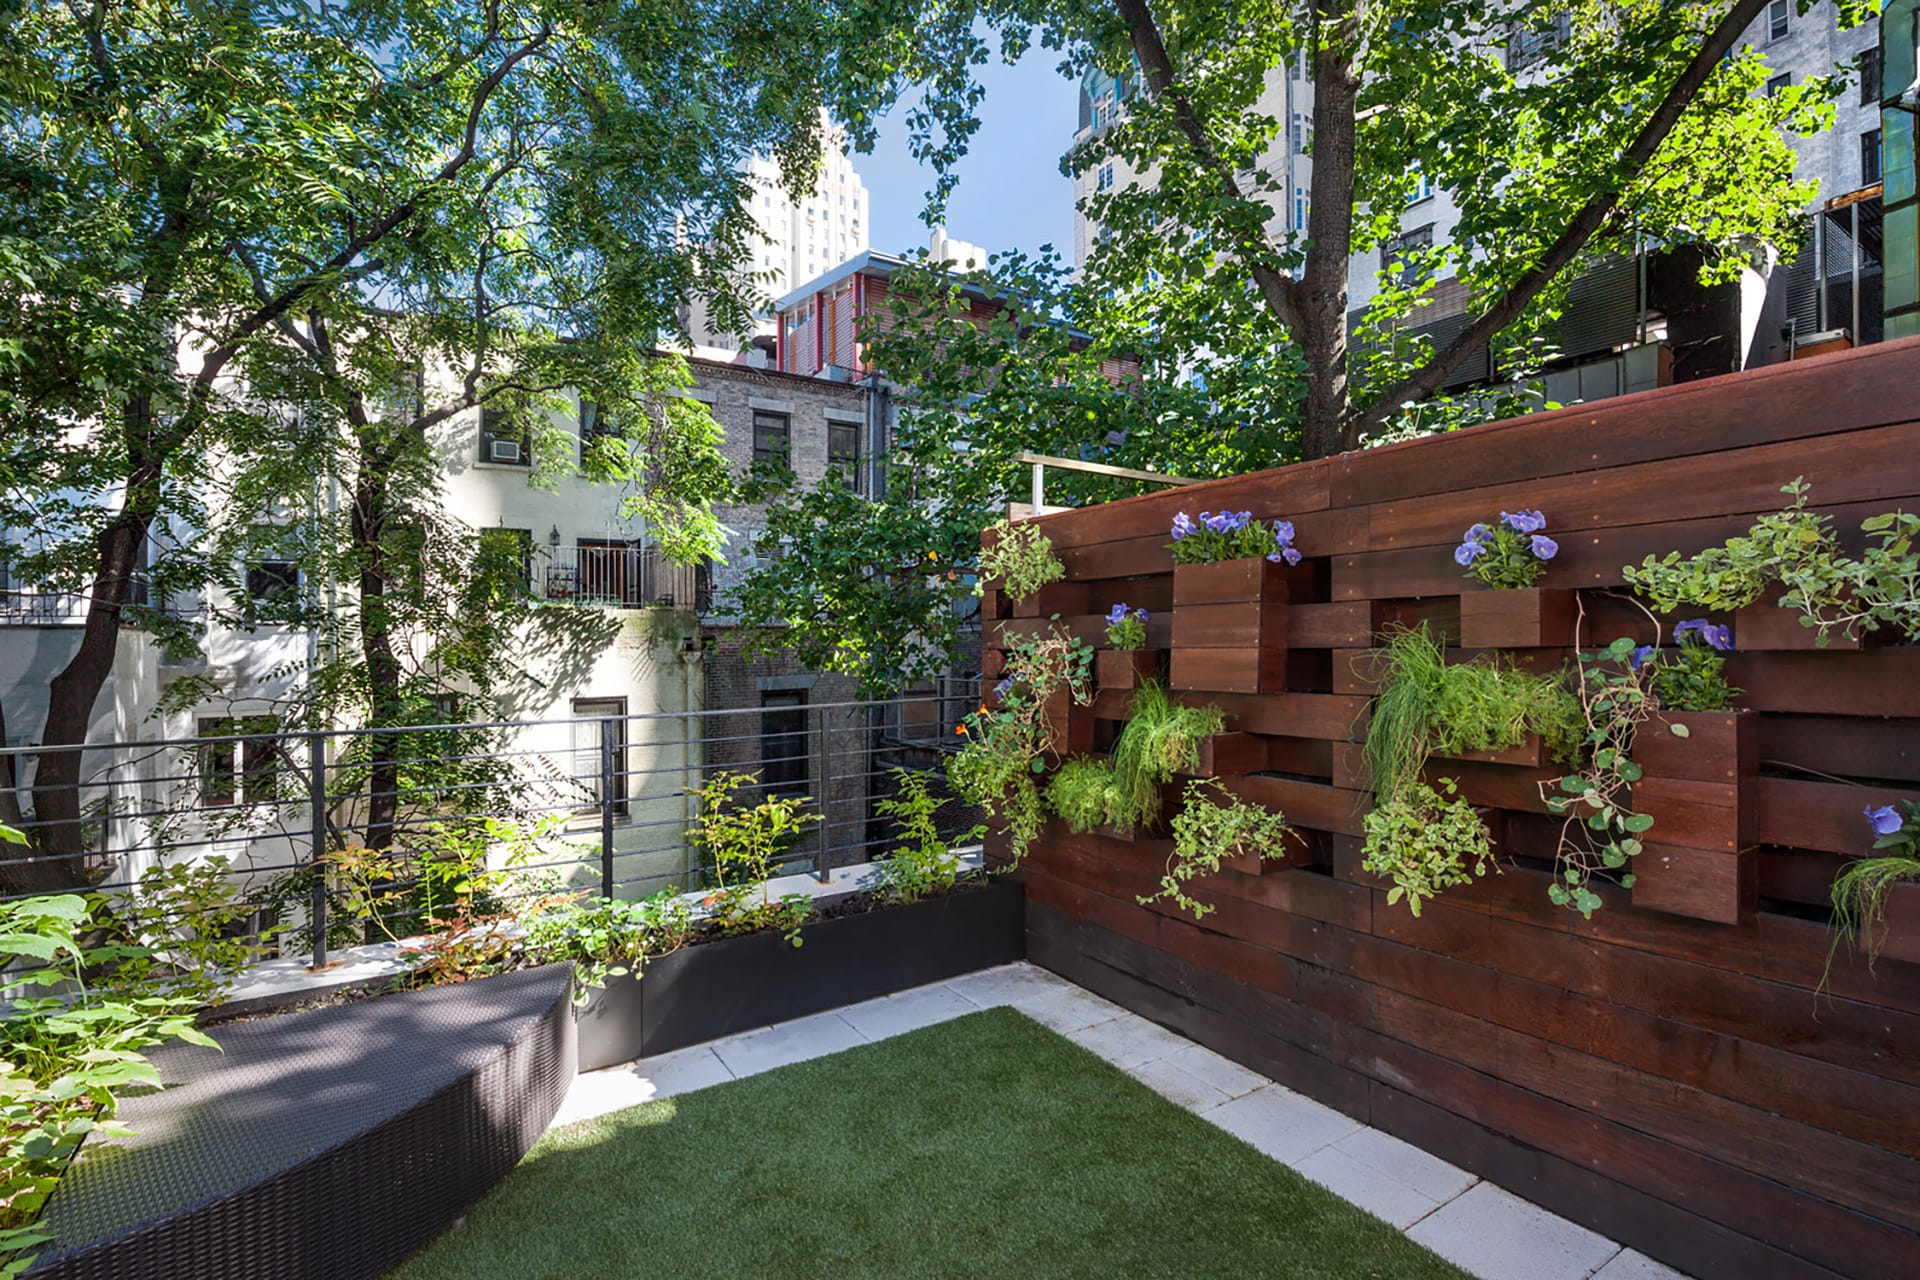 Rear terrace with a custom fence with planters and a grass area